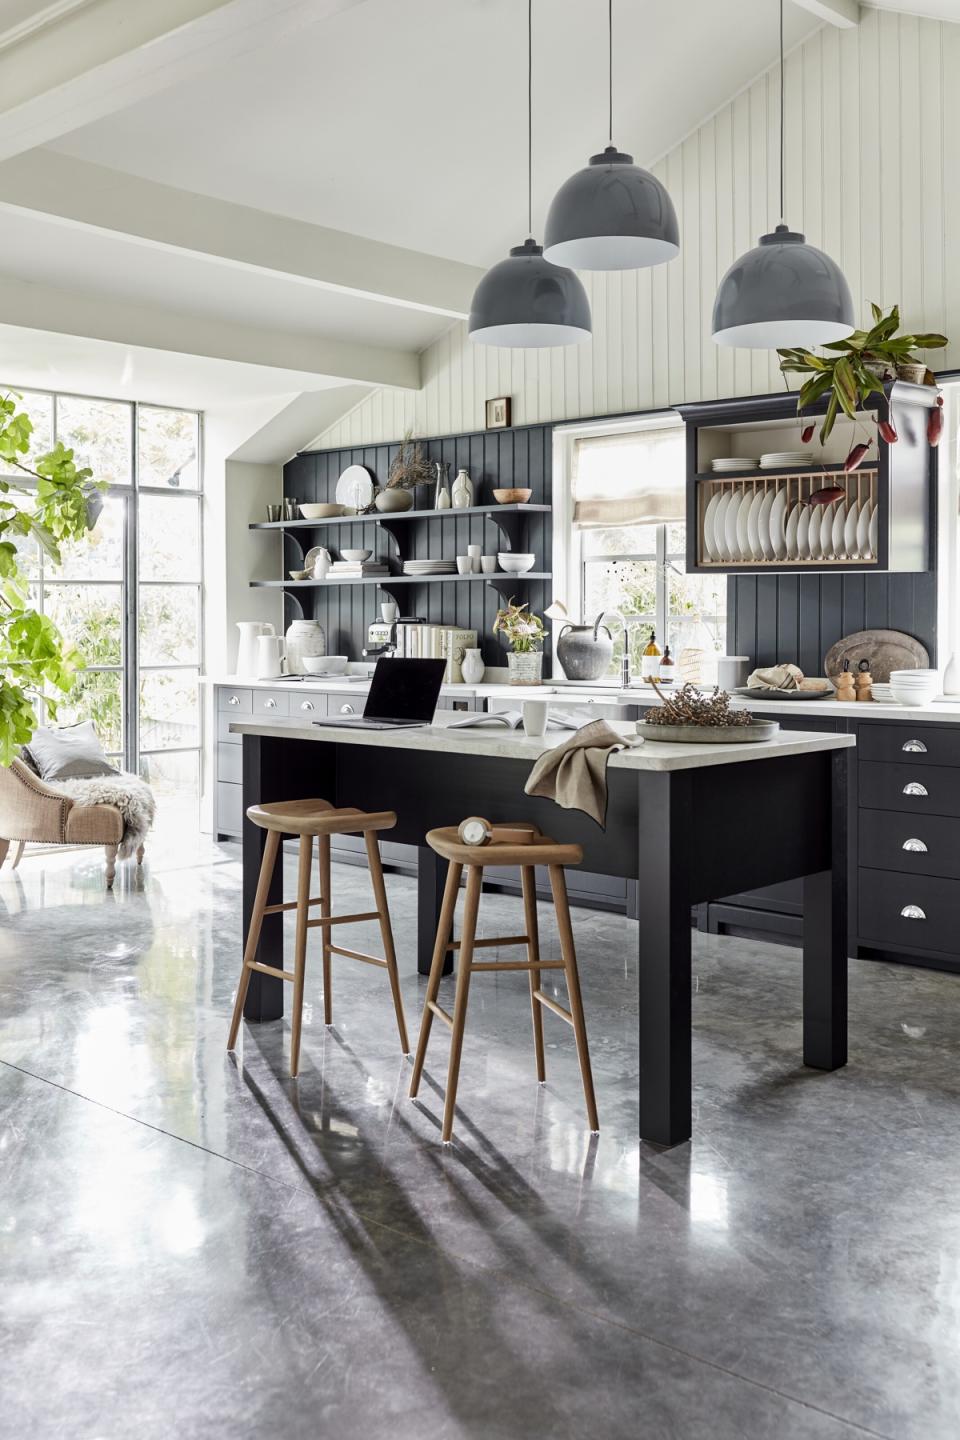 Kitchen island ideas in dark gray with two wooden stools, in a room with high ceilings and gray stone flooring.